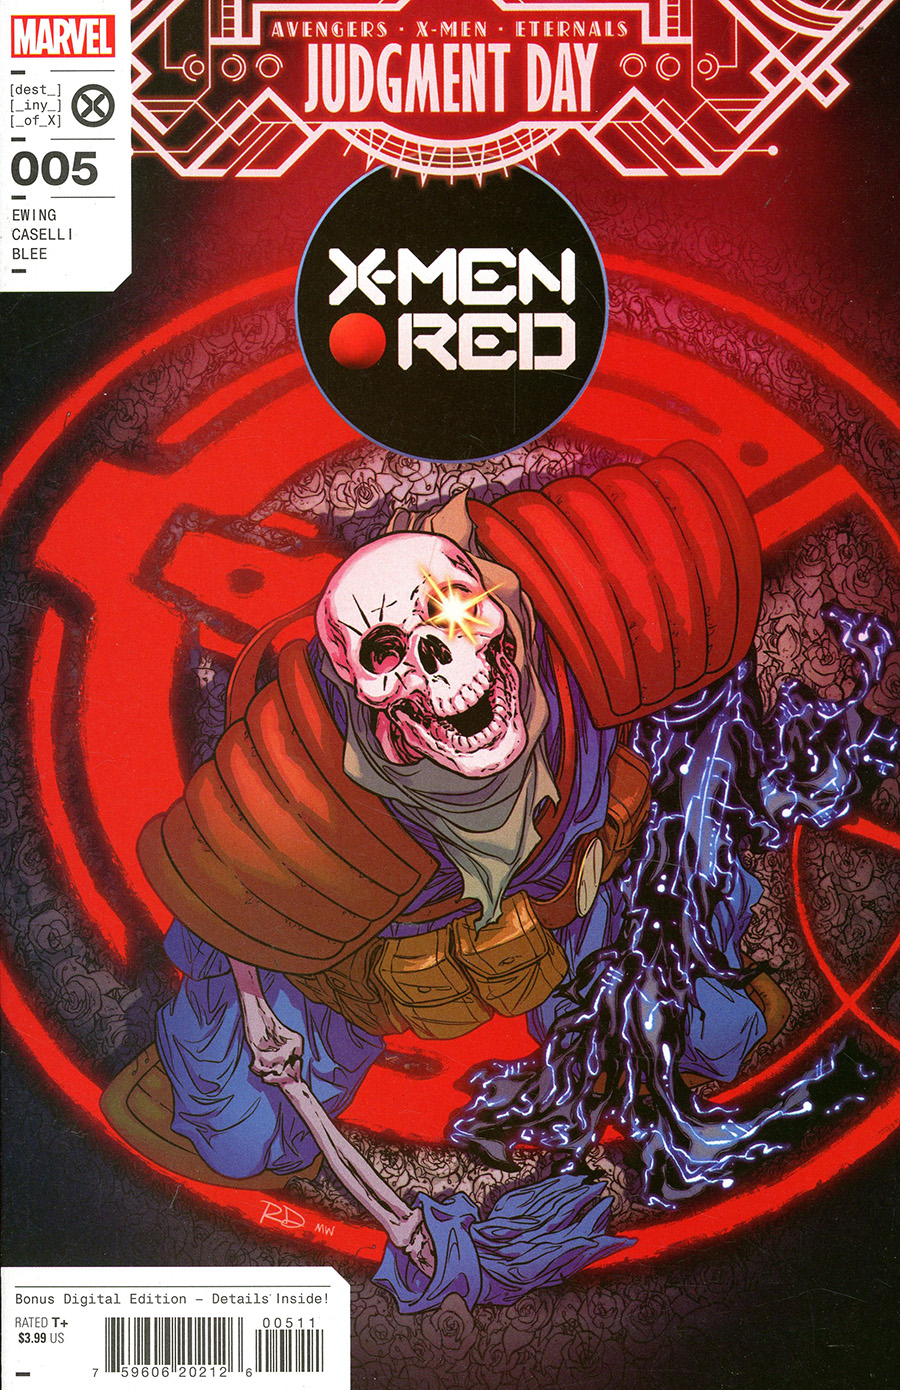 X-Men Red Vol 2 #5 Cover A Regular Russell Dauterman Cover (A.X.E. Judgment Day Tie-In)